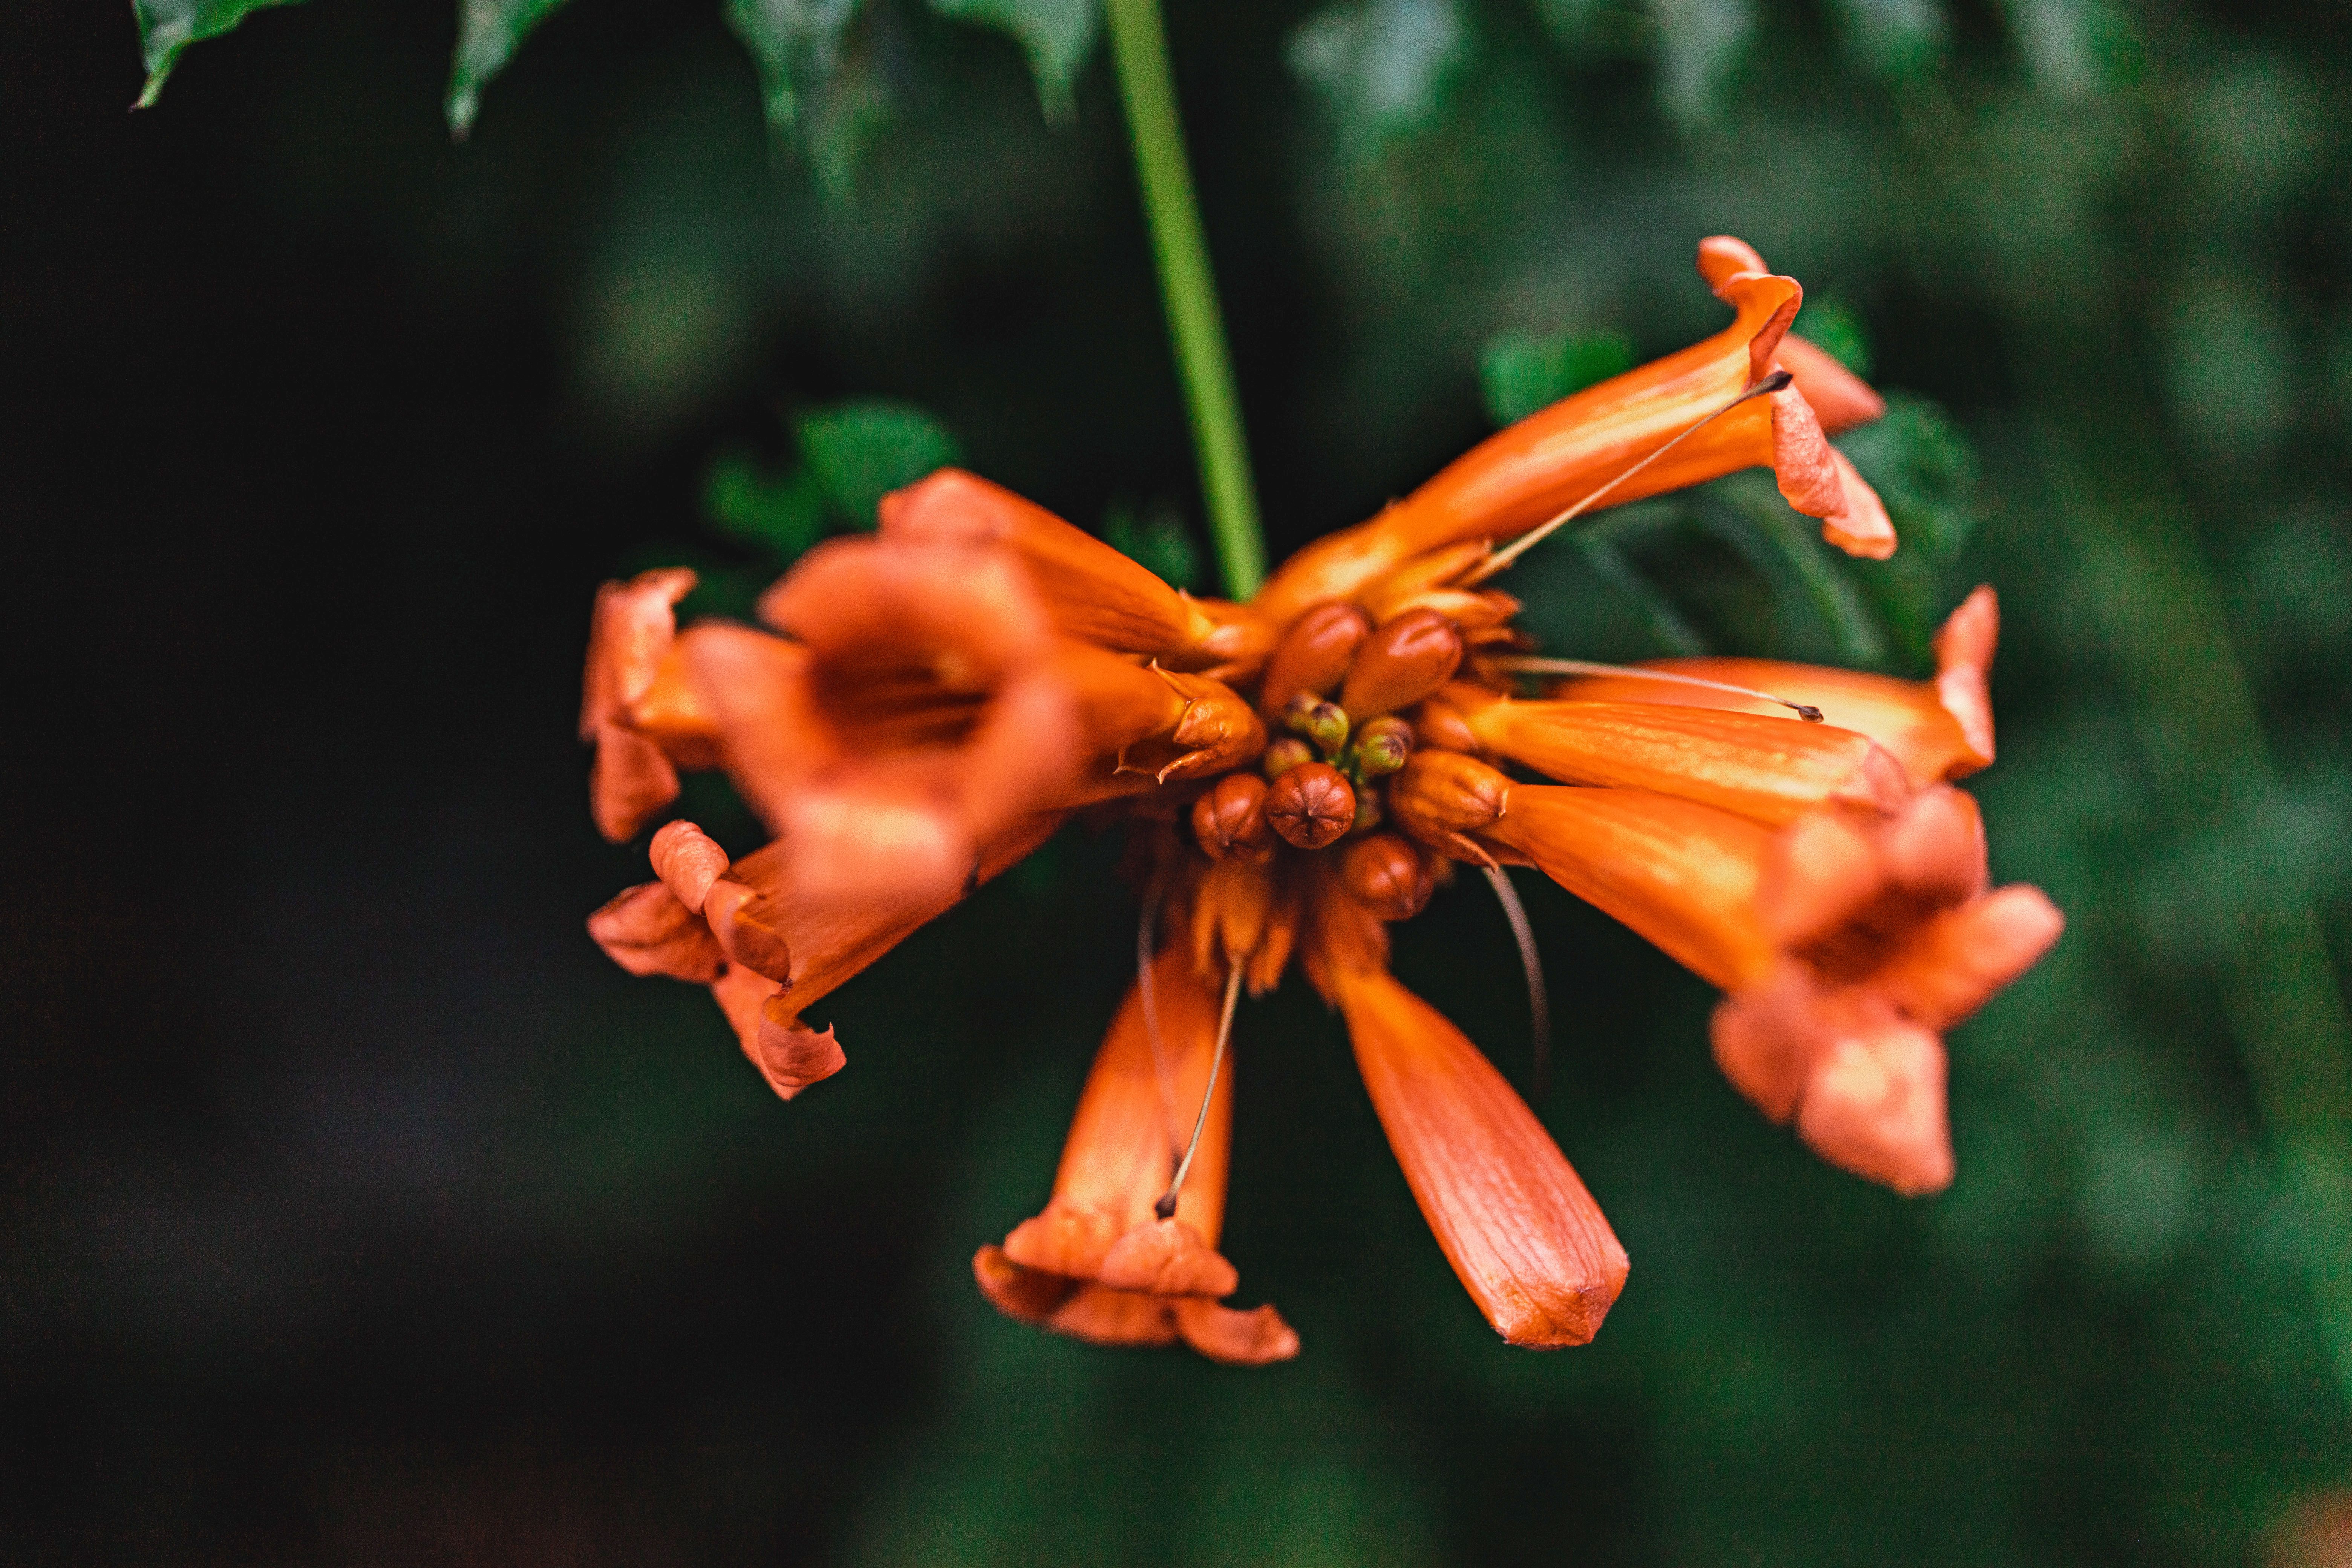 This Orange Flower Is Very Attractive to Hummingbirds and Pollinators